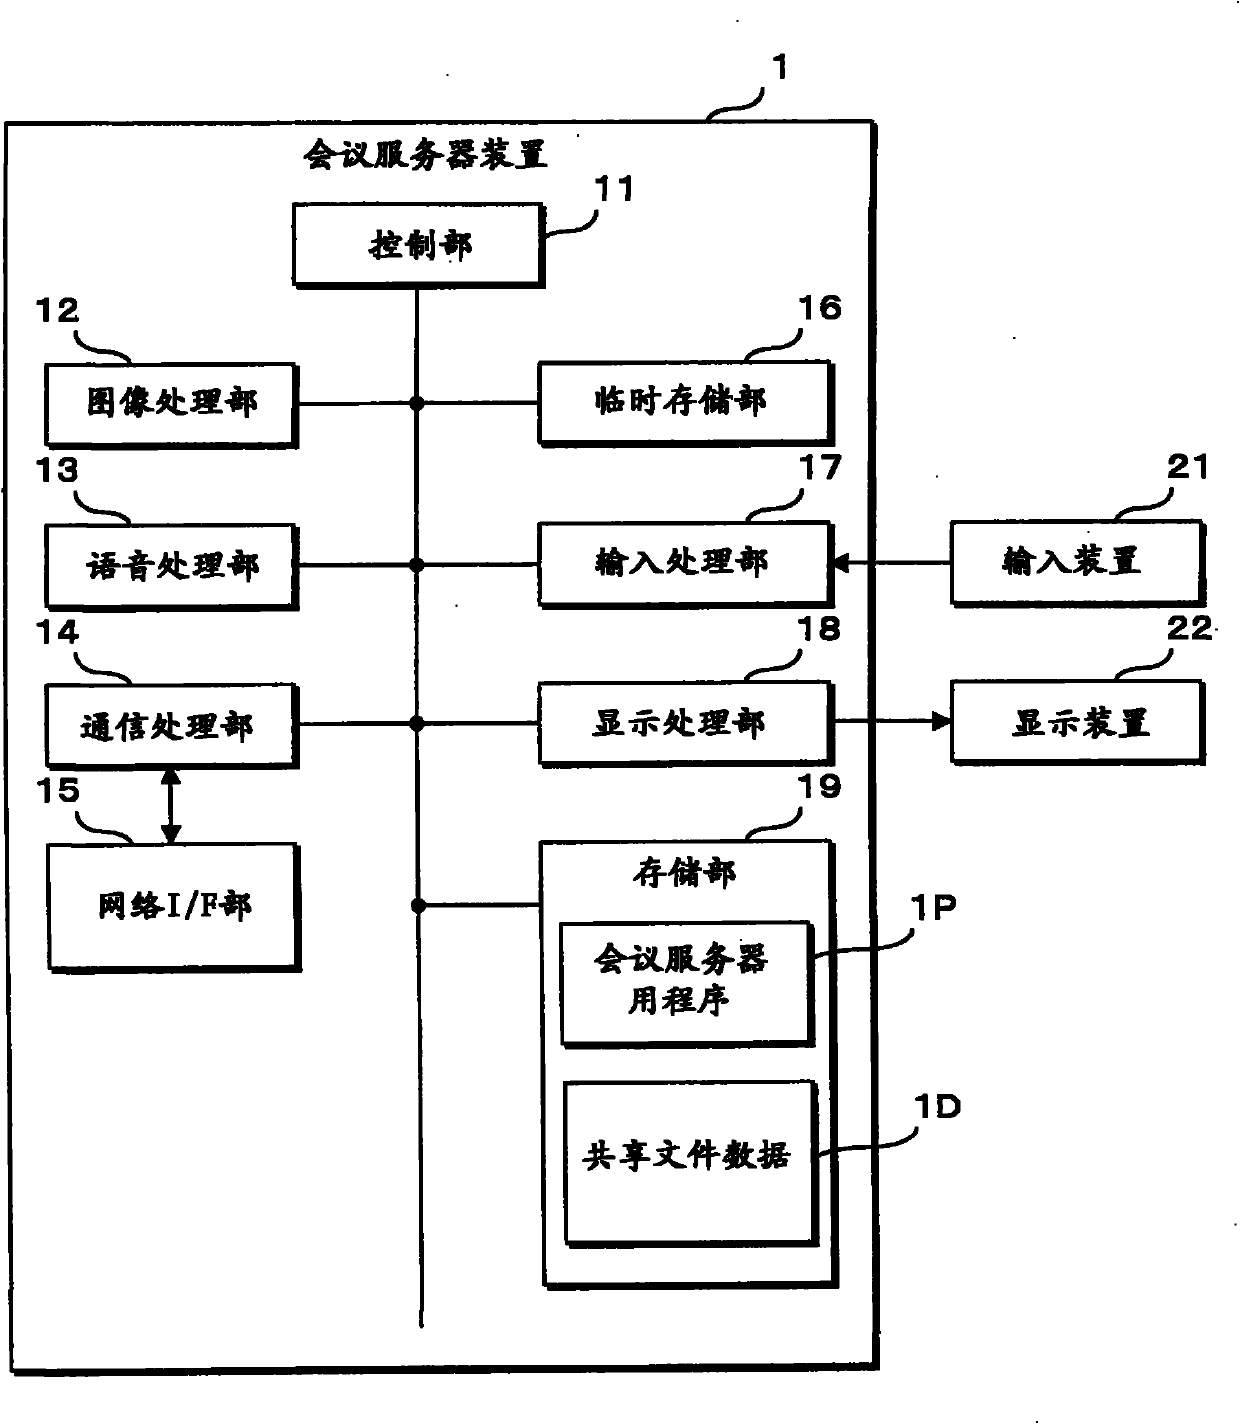 Information processing apparatus and teleconference system